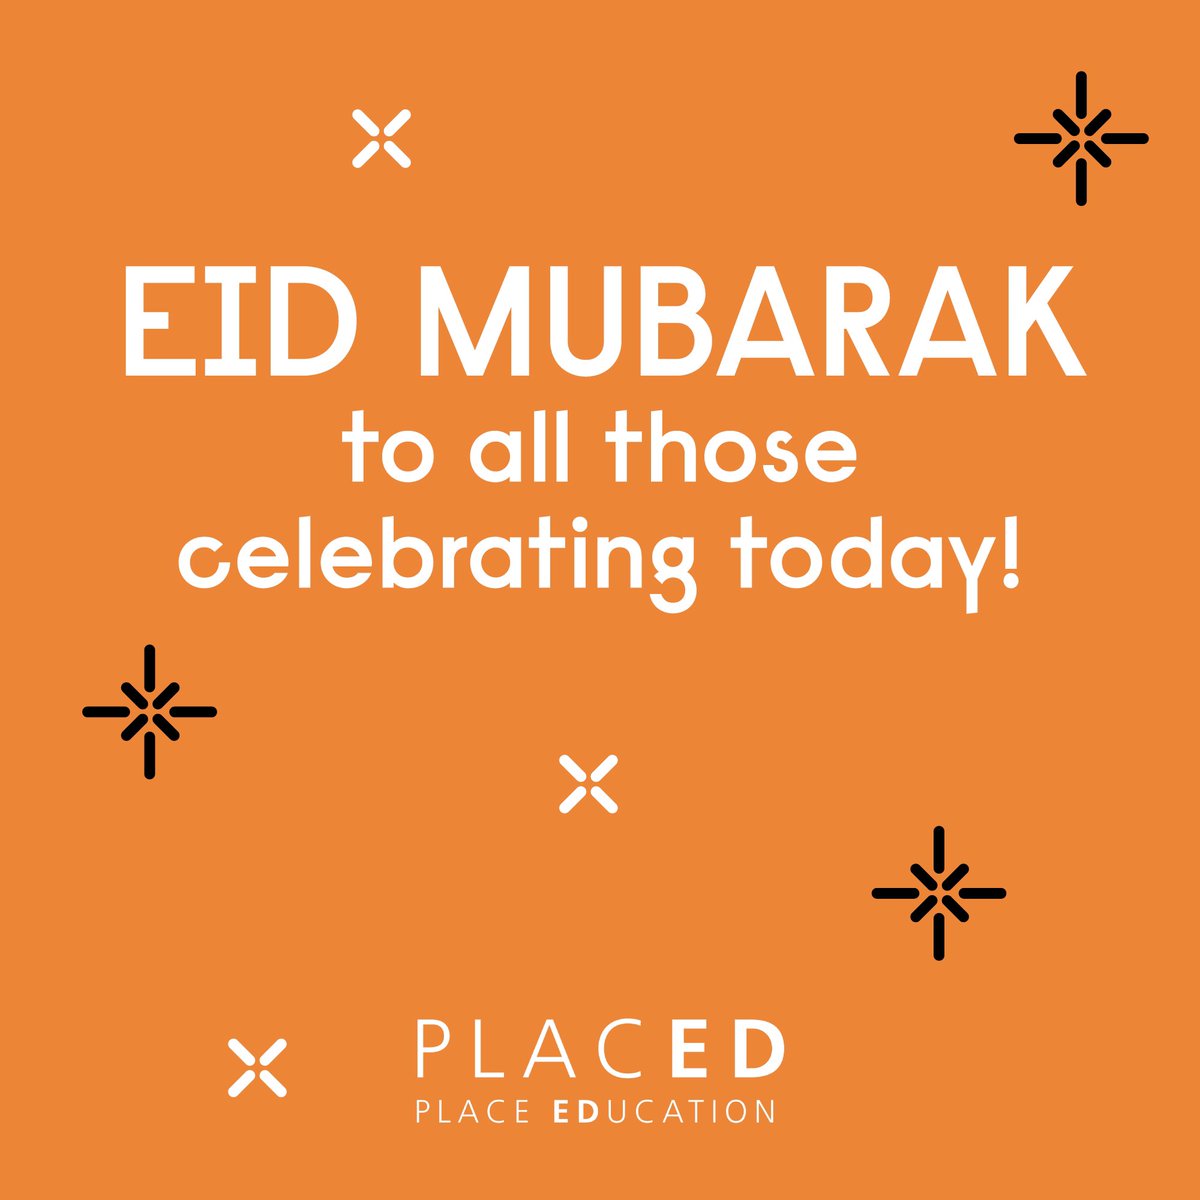 Eid Mubarak to all those celebrating today! ✨ #PLACED